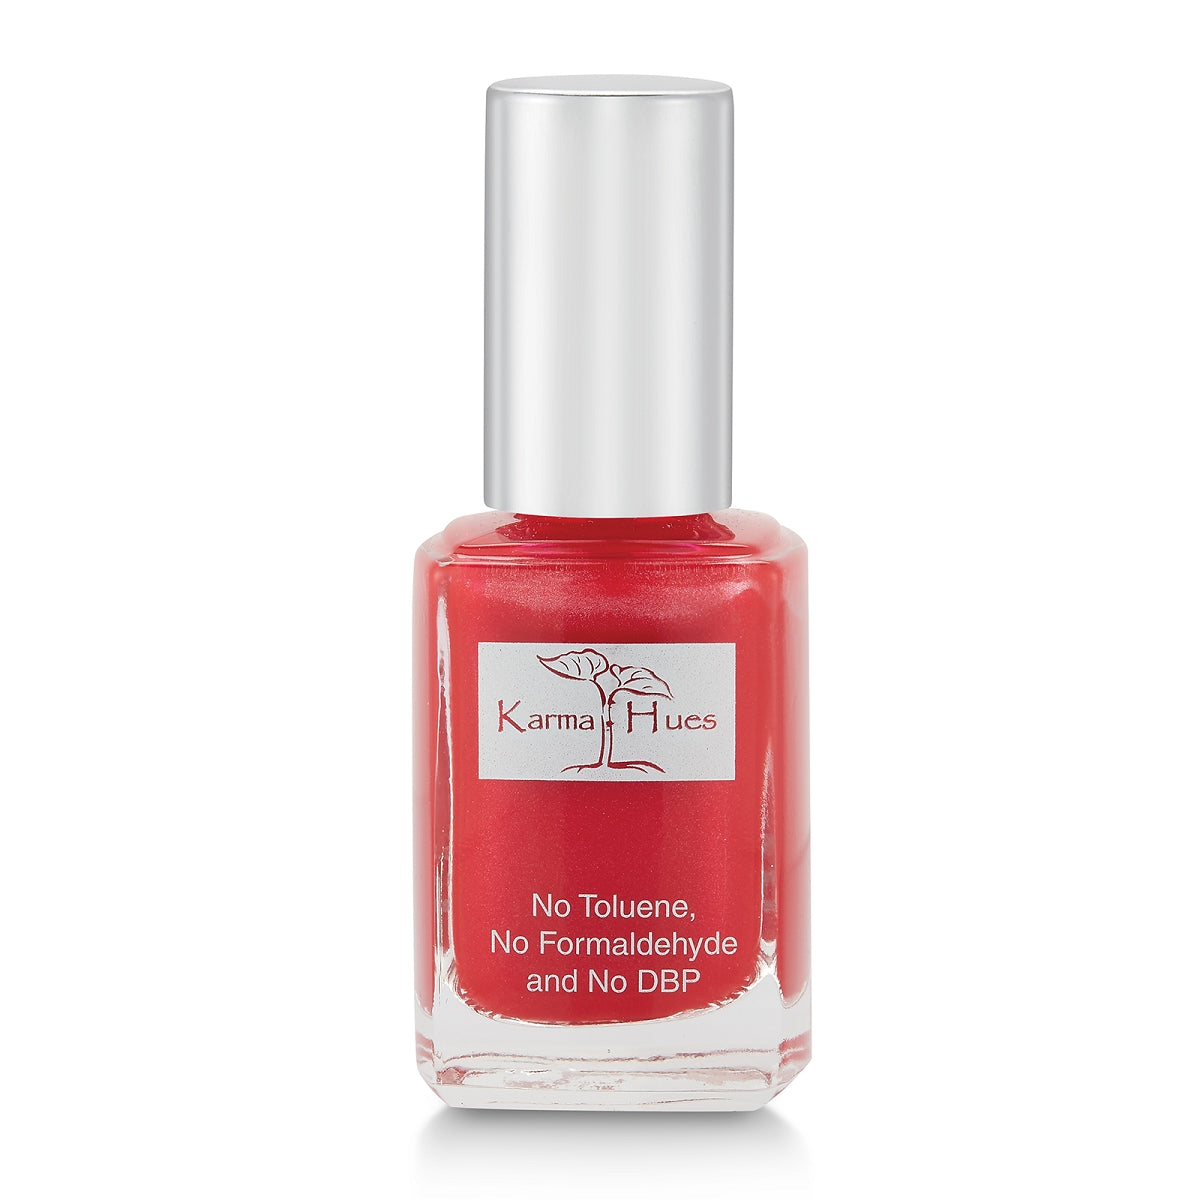 Little Red Dress - Nail Polish; Non-Toxic, Vegan, and Cruelty-Free (#59)